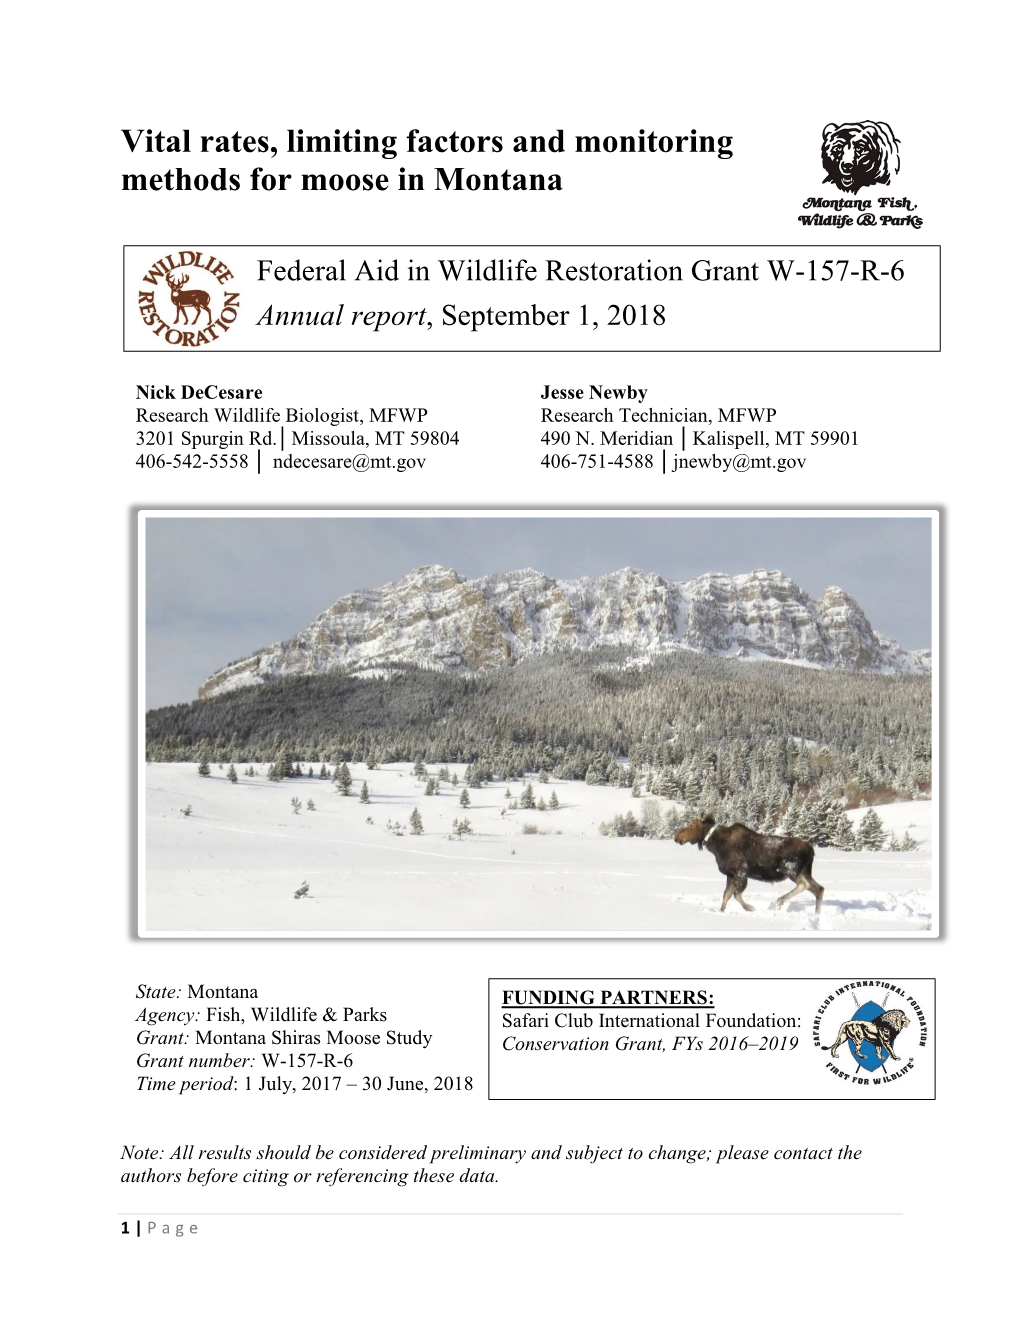 Vital Rates, Limiting Factors and Monitoring Methods for Moose in Montana